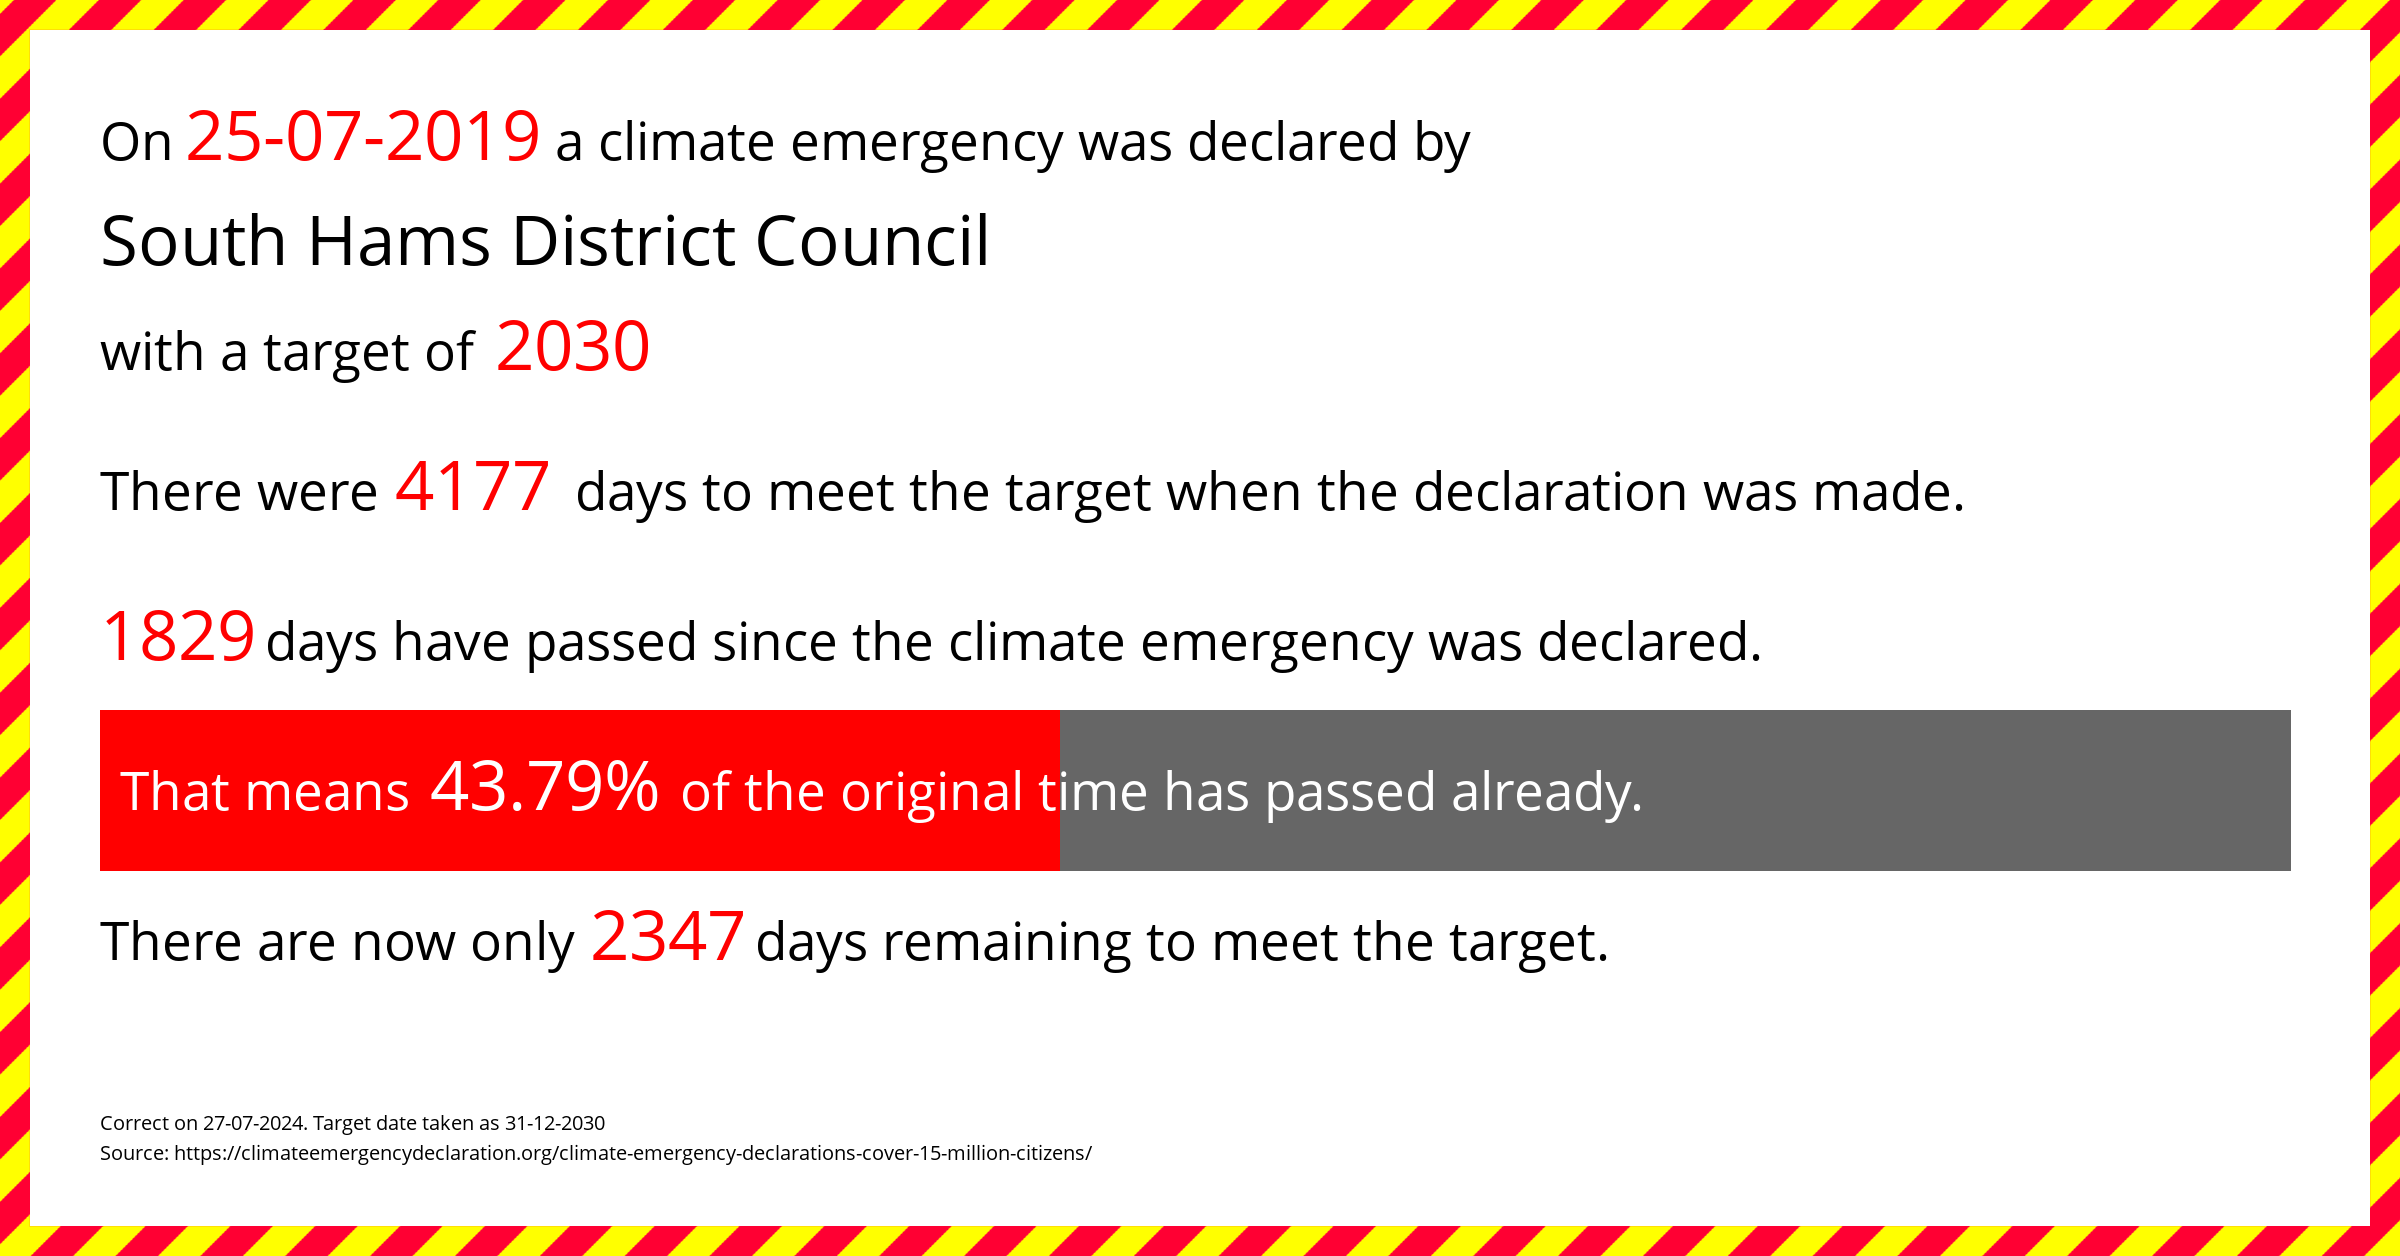 South Hams District Council declared a Climate emergency on Thursday 25th July 2019, with a target of 2030.